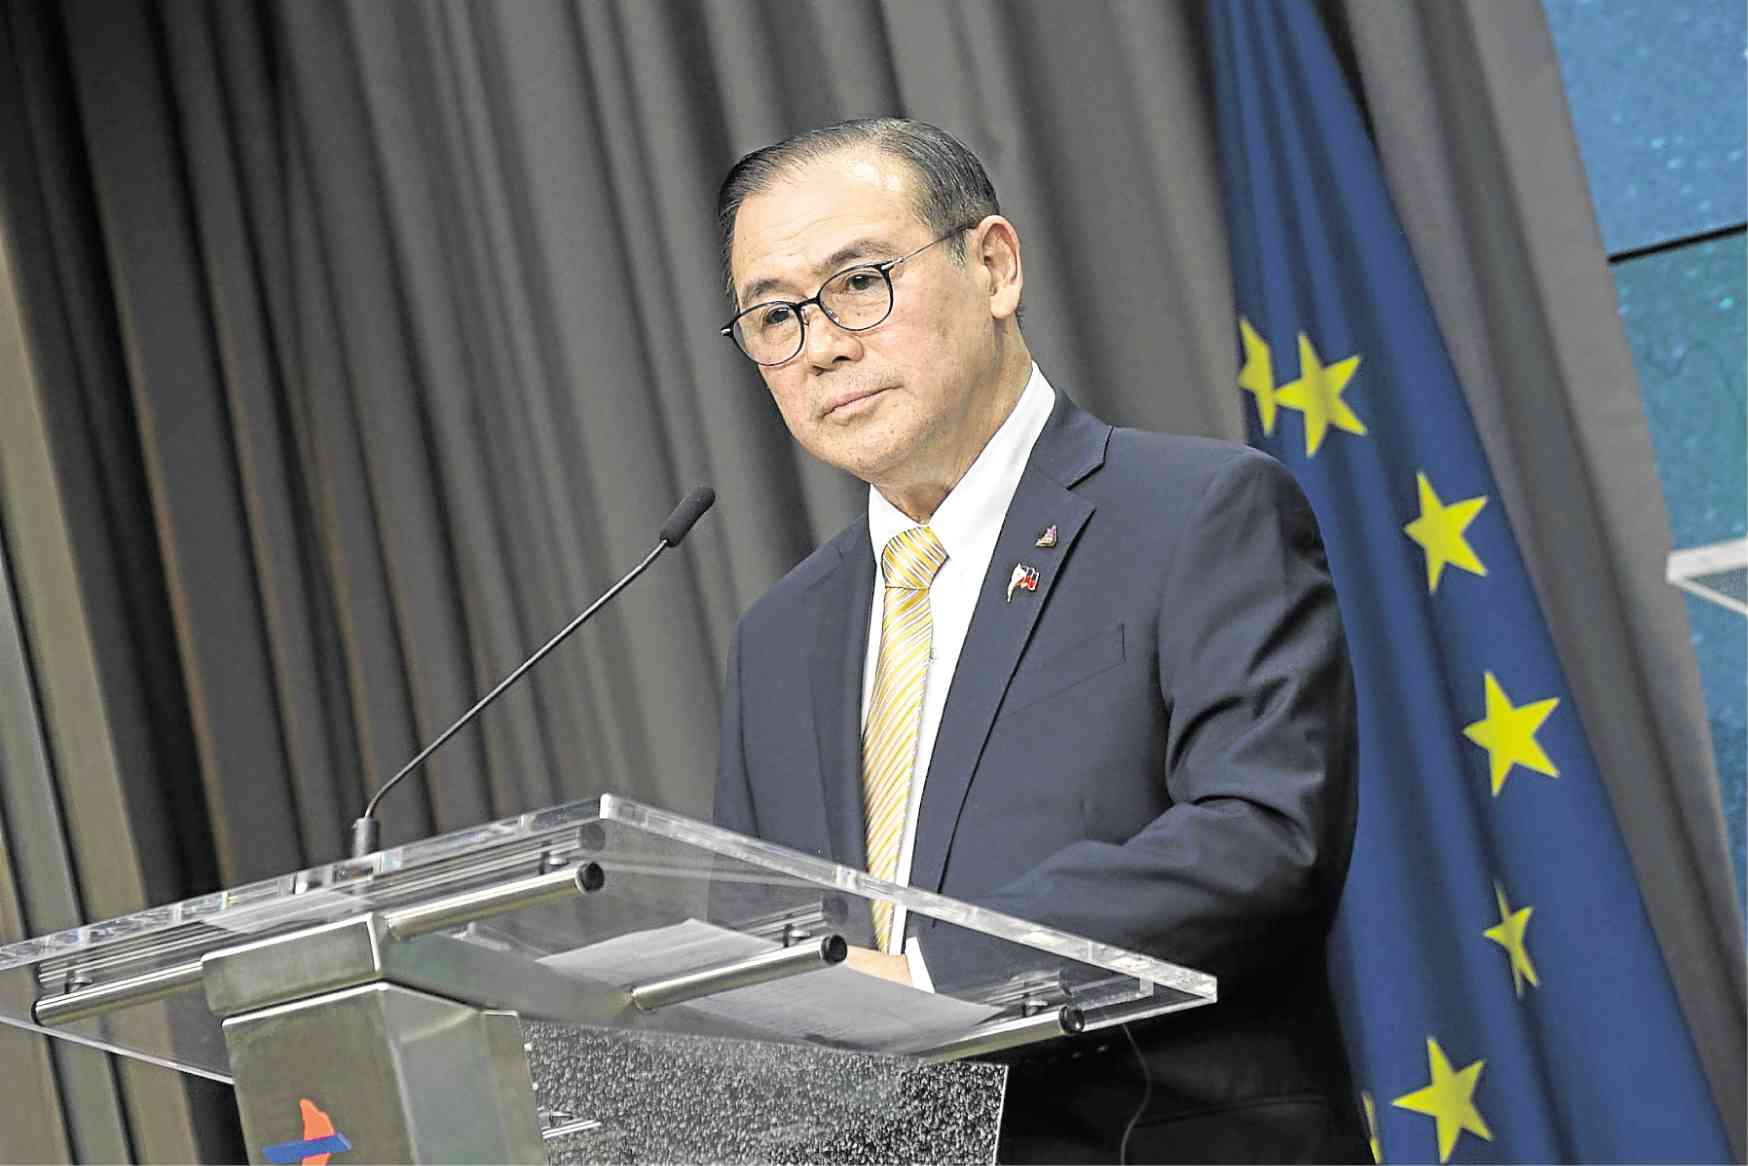 Locsin: Chinese ships passing PH waters sans permission angers Duterte